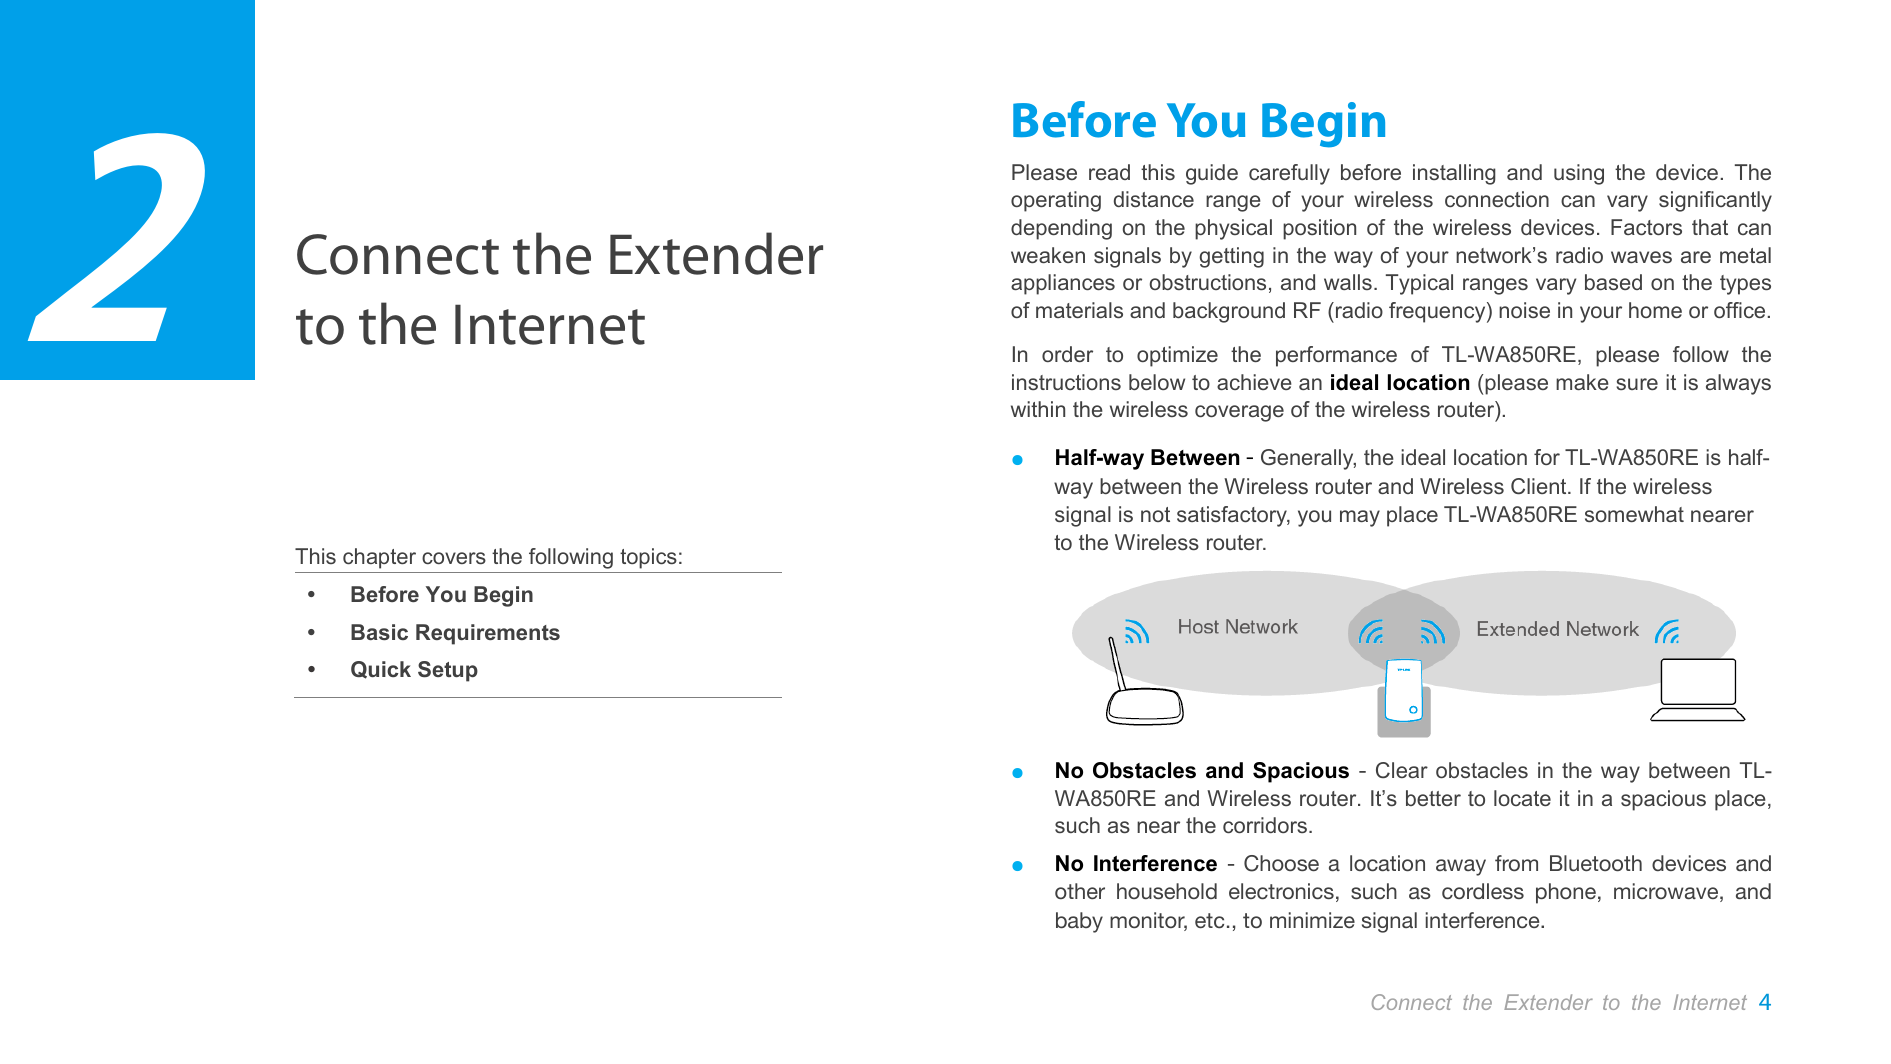  Connect the Extender to the Internet     This chapter covers the following topics:  Before You Begin  Basic Requirements  Quick Setup Before You Begin Please read this guide carefully before installing and using the device. The operating distance range of your wireless connection can vary significantly depending on the physical position of the wireless devices. Factors that can weaken signals by getting in the way of your network’s radio waves are metal appliances or obstructions, and walls. Typical ranges vary based on the types of materials and background RF (radio frequency) noise in your home or office. In order to optimize the performance of TL-WA850RE,  please follow the instructions below to achieve an ideal location (please make sure it is always within the wireless coverage of the wireless router). ● Half-way Between - Generally, the ideal location for TL-WA850RE is half-way between the Wireless router and Wireless Client. If the wireless signal is not satisfactory, you may place TL-WA850RE somewhat nearer to the Wireless router.  ● No Obstacles and Spacious - Clear obstacles in the way between TL-WA850RE and Wireless router. It’s better to locate it in a spacious place, such as near the corridors.   ● No Interference -  Choose a location away from Bluetooth devices and other household electronics, such as cordless phone, microwave, and baby monitor, etc., to minimize signal interference.  2 Connect the Extender to the Internet  4  